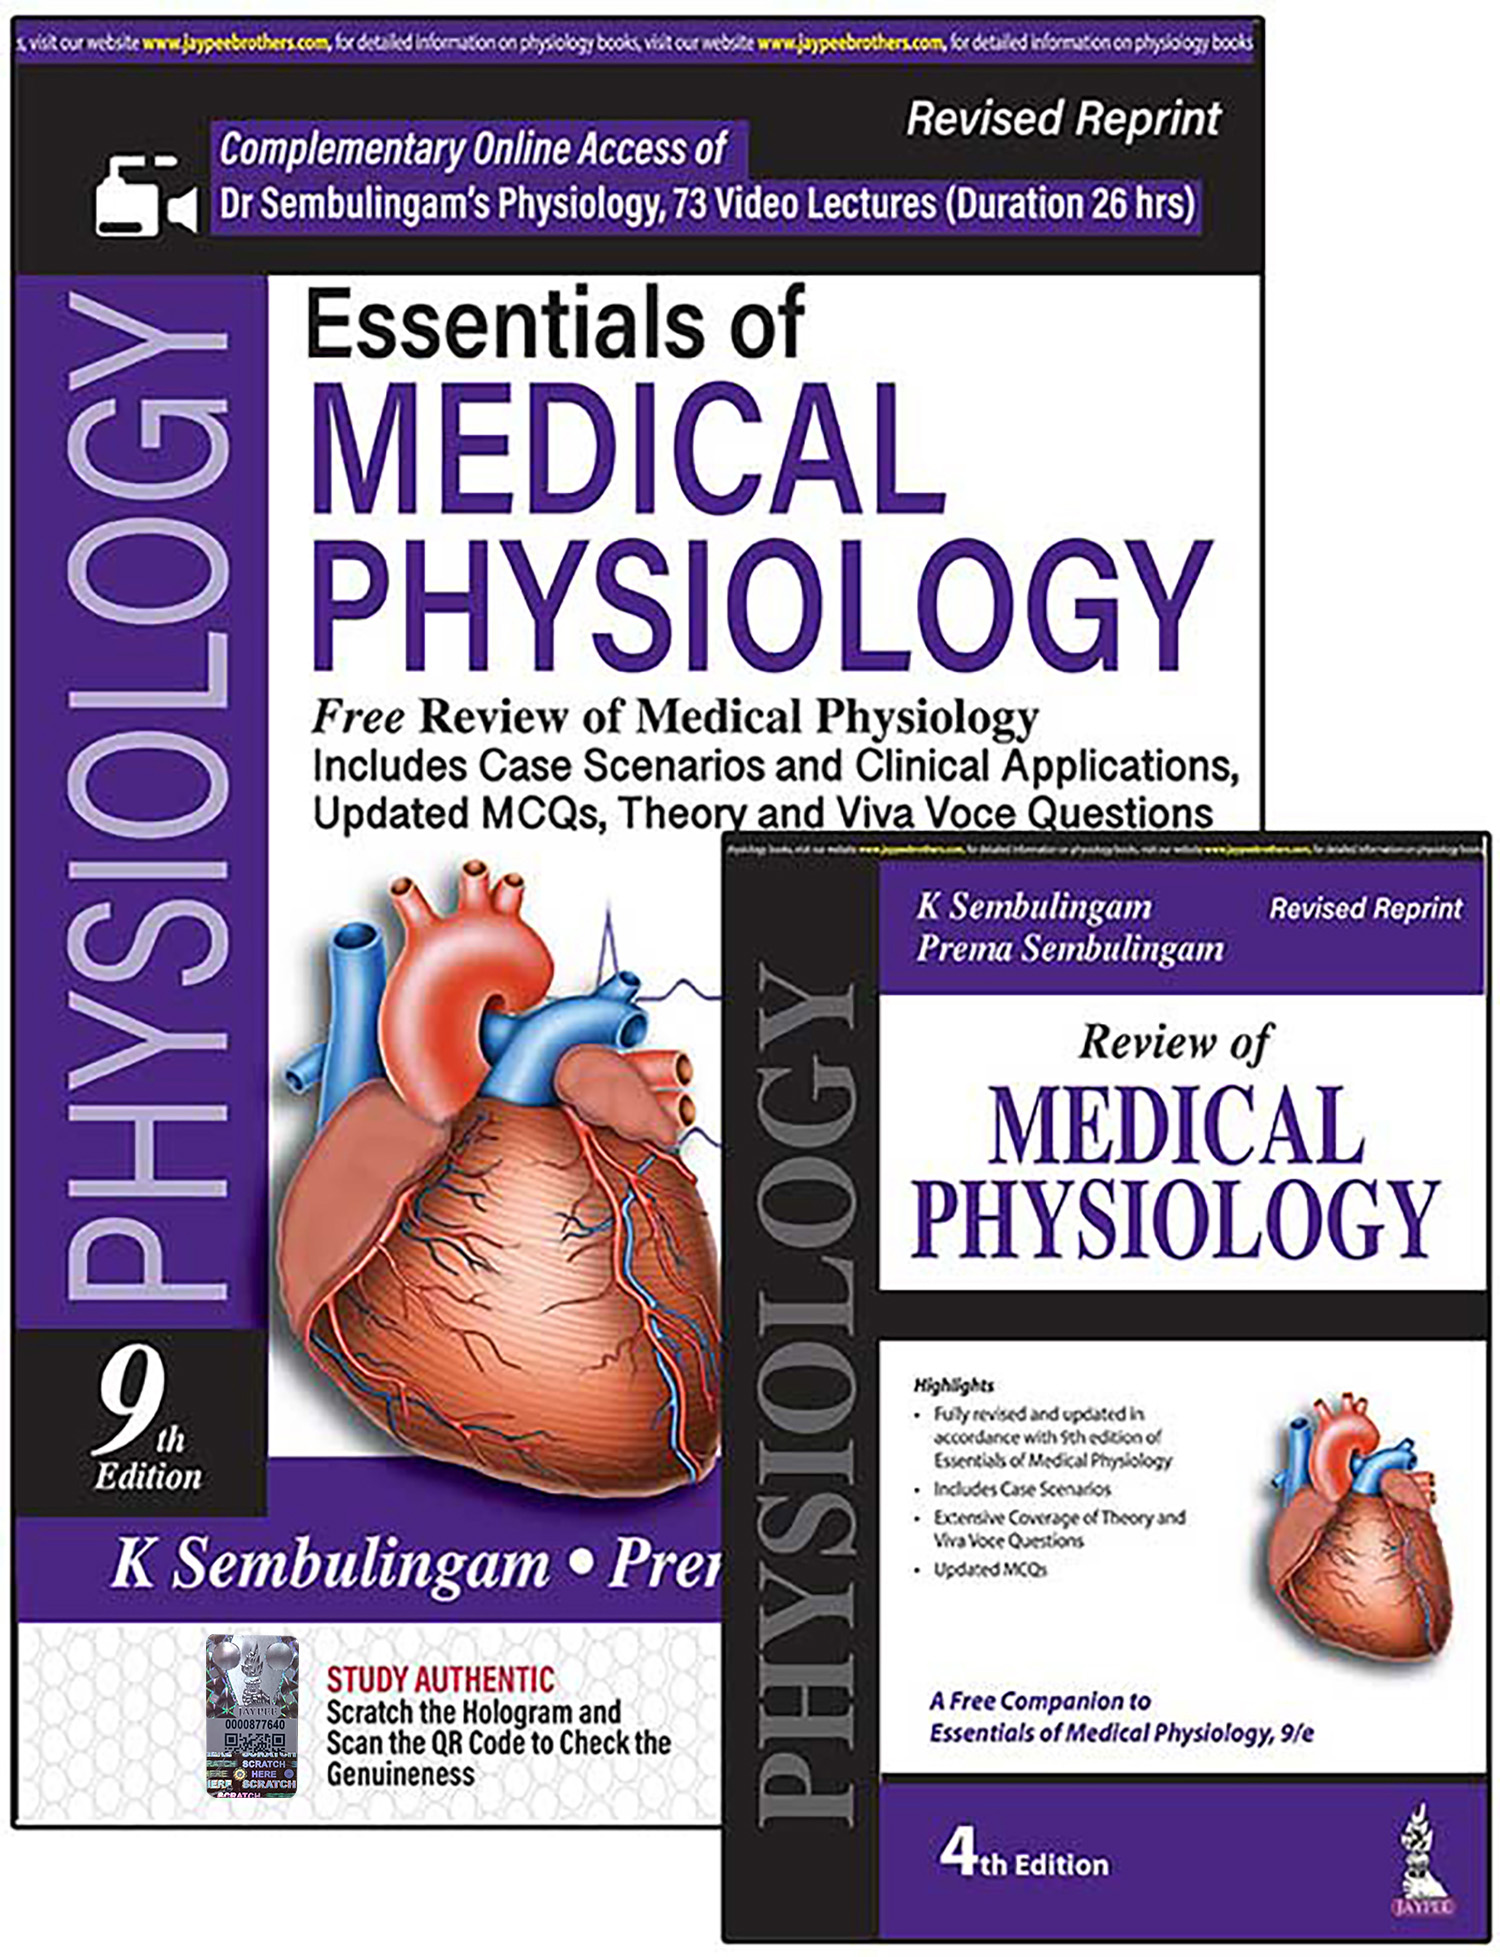 Essentials of Medical Physiology (Free Review of Medical Physiology)